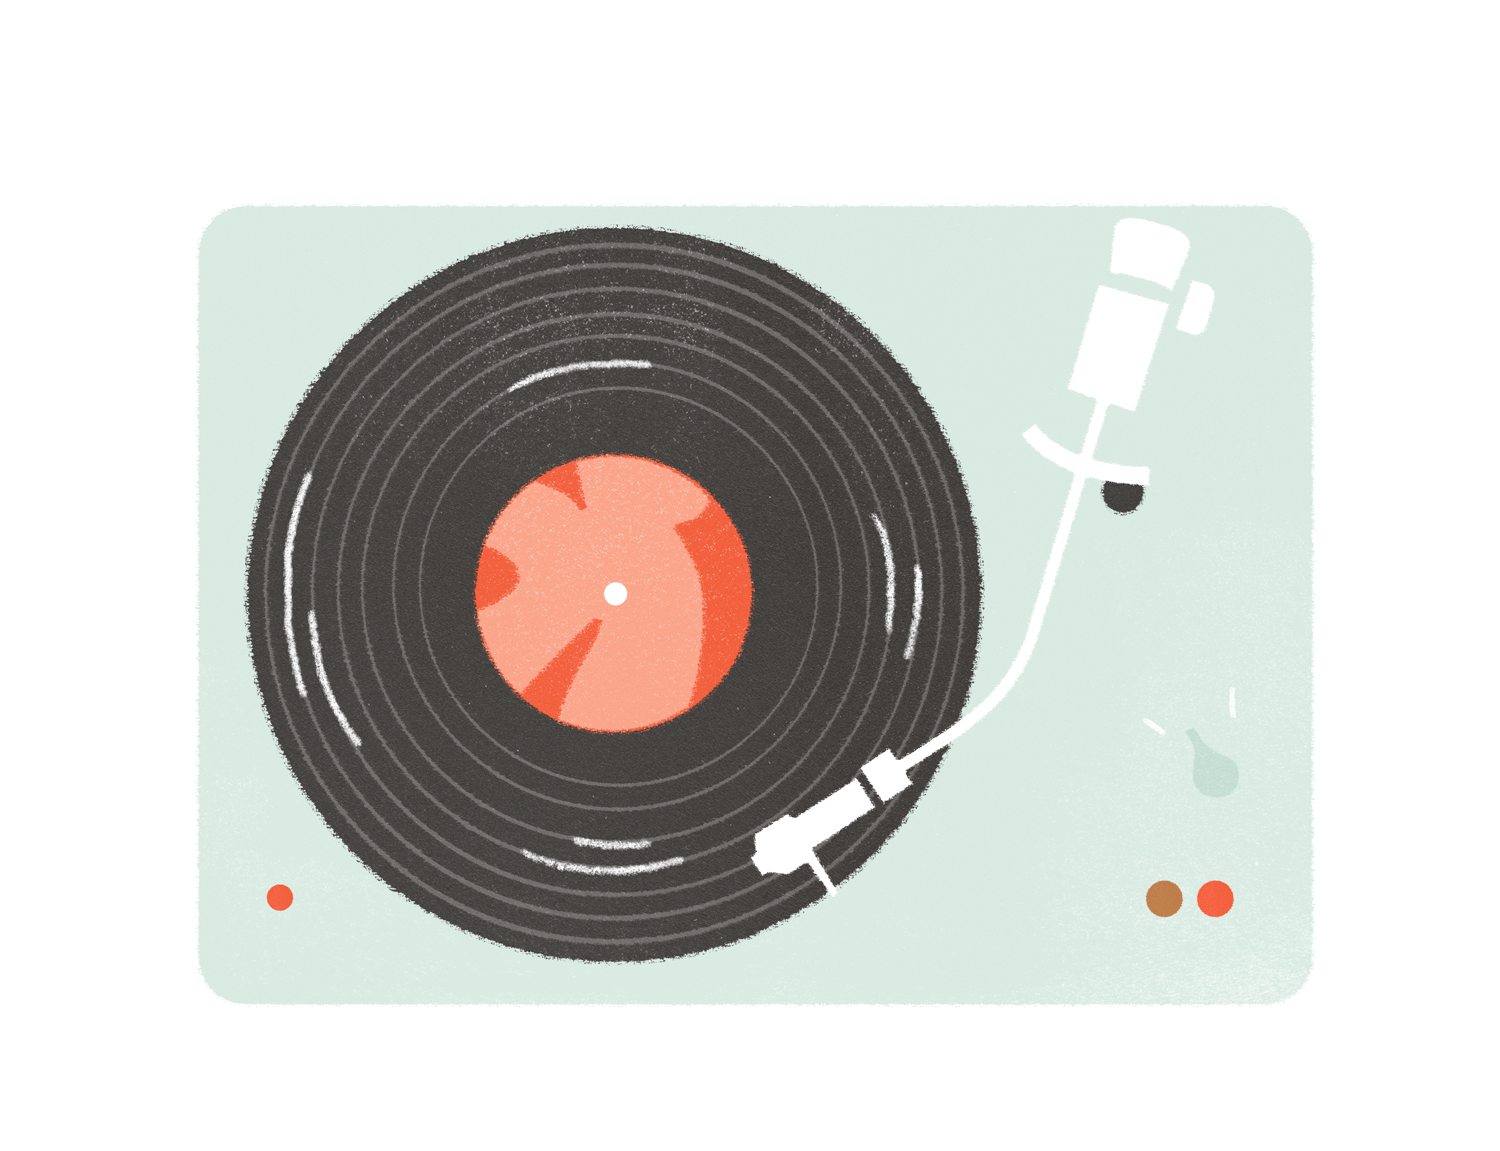 Animated gif illustration of record player playing vinyl LP record